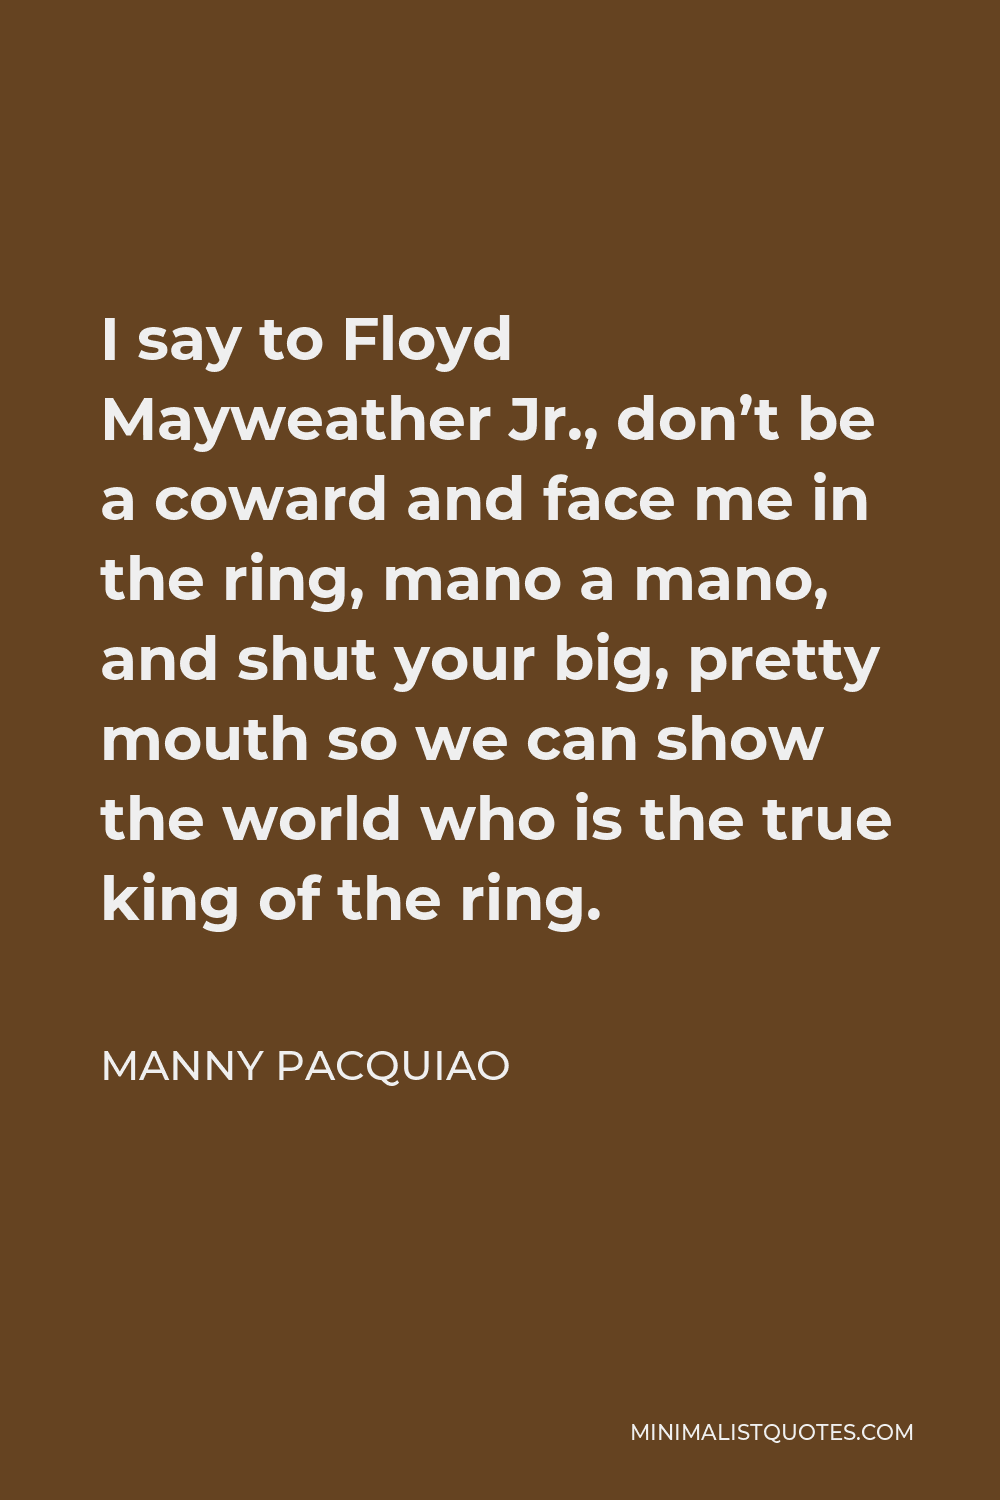 Manny Pacquiao Quote - I say to Floyd Mayweather Jr., don’t be a coward and face me in the ring, mano a mano, and shut your big, pretty mouth so we can show the world who is the true king of the ring.